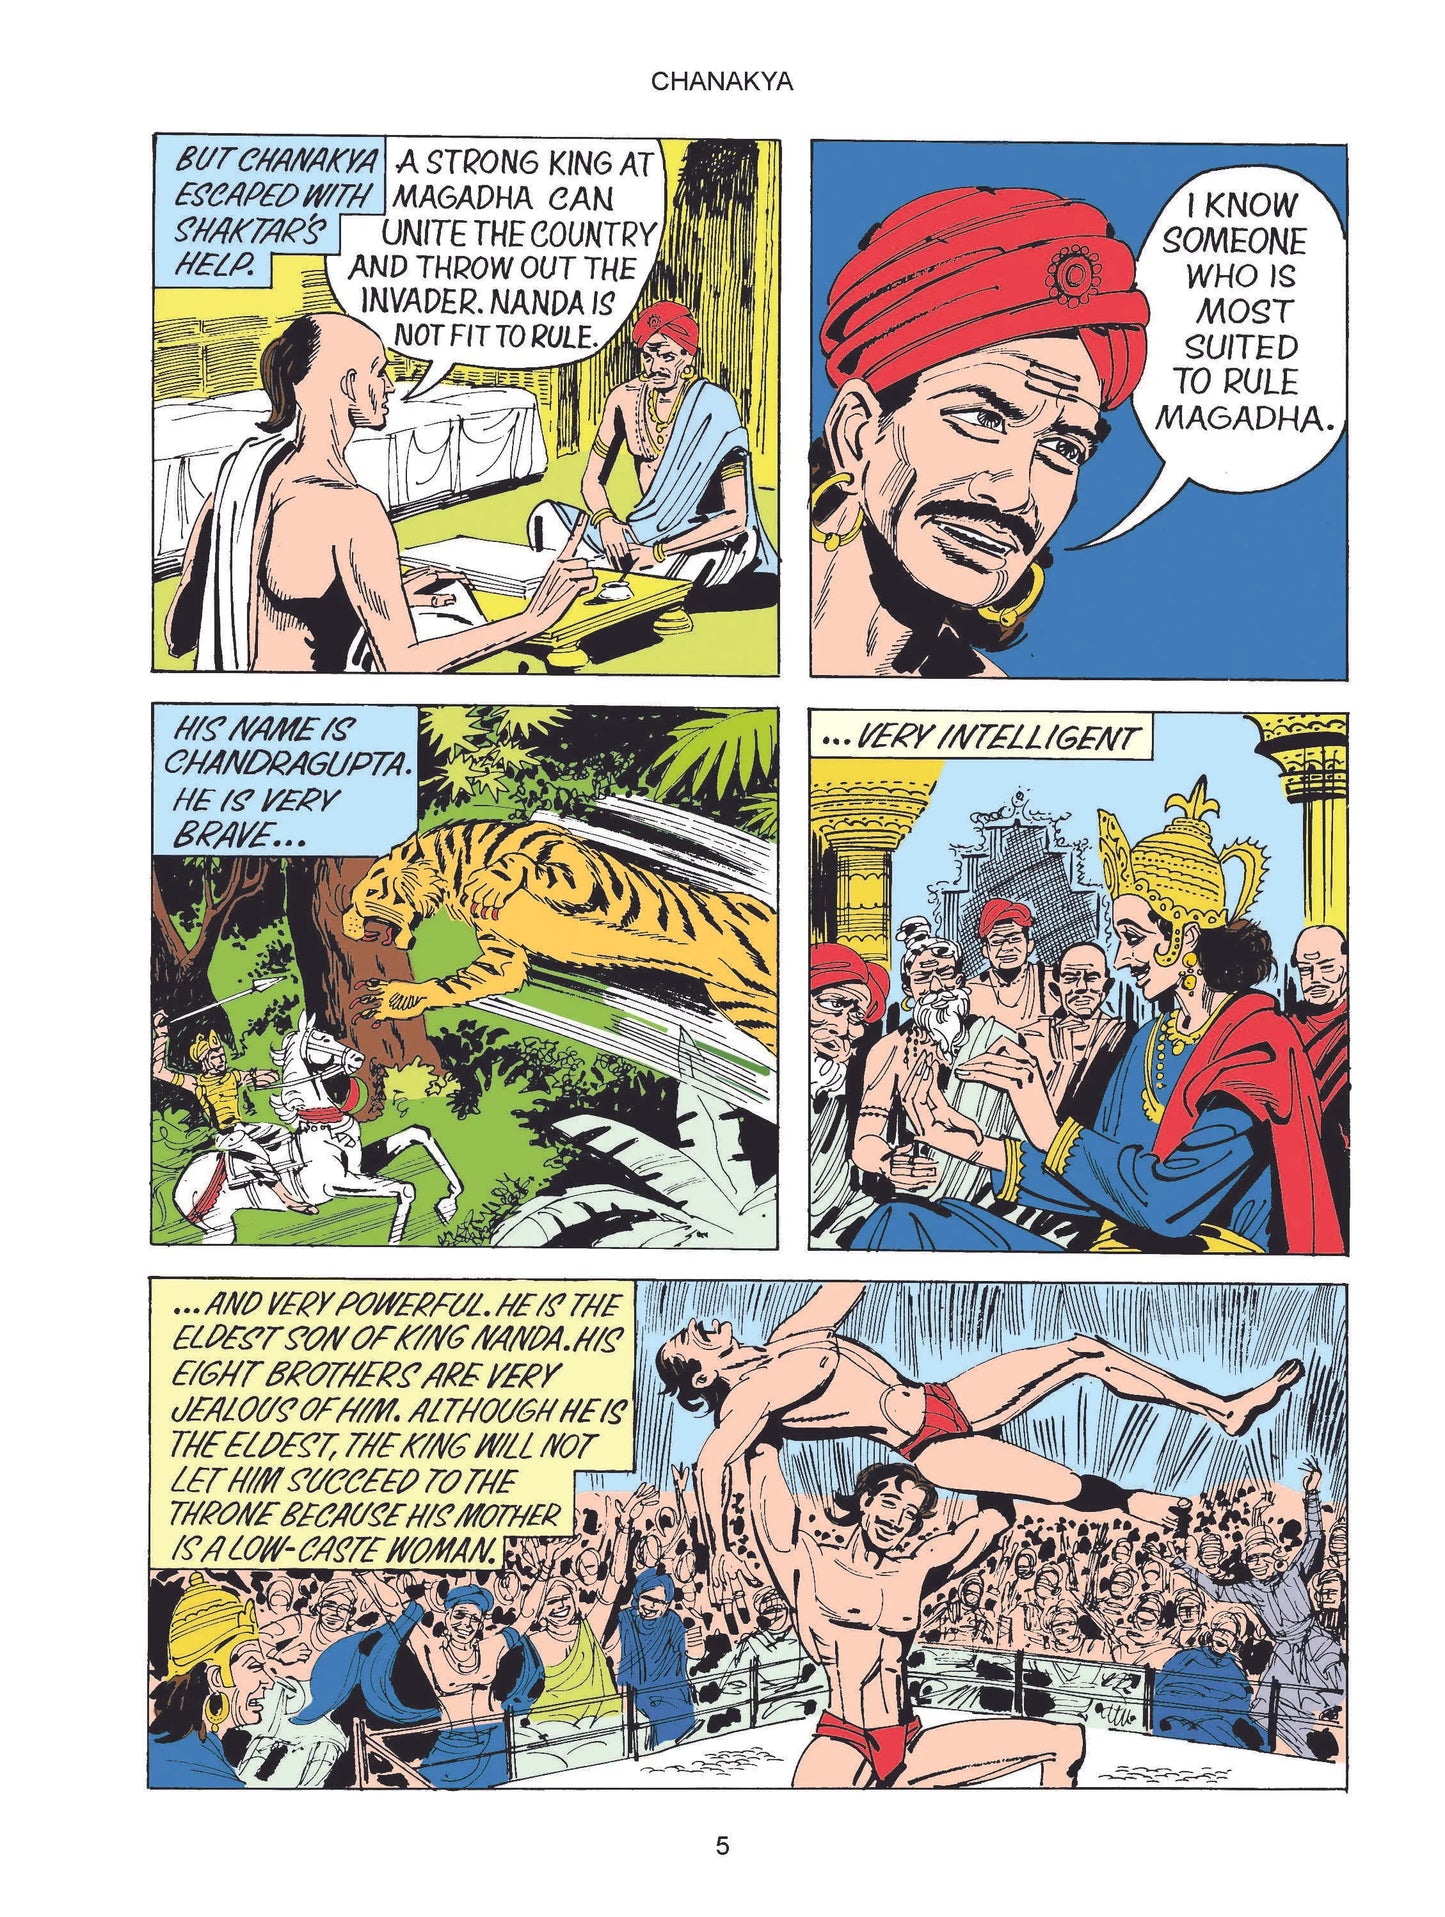 Amar Chitra Katha - Clever Minister 3 in 1